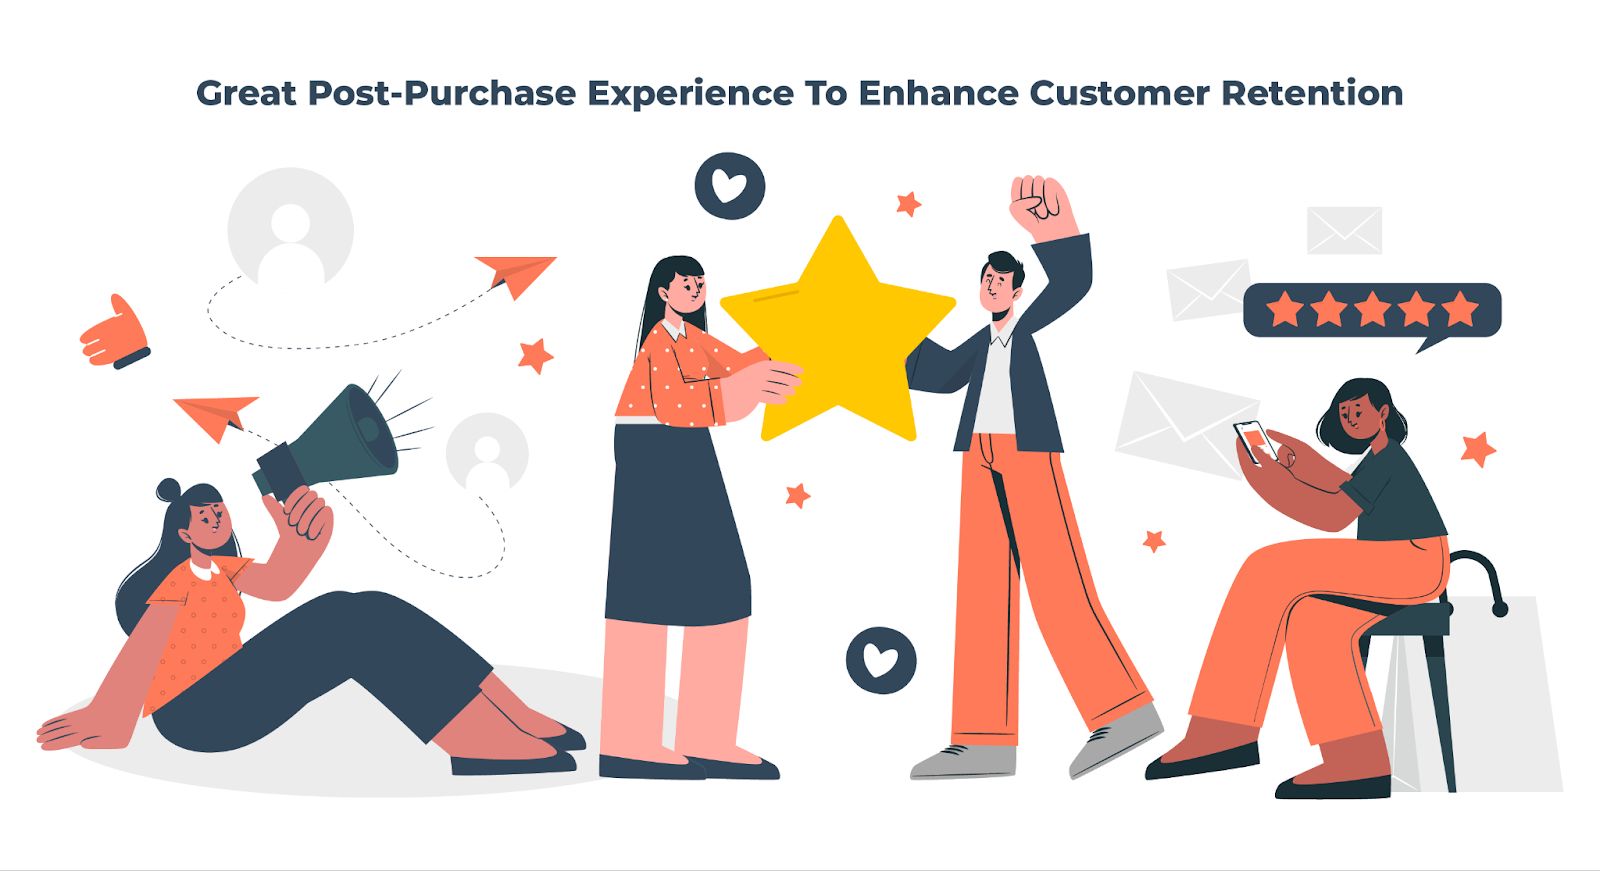 How To Increase Customer Retention by Nurturing a Positive Post-purchase Experience.